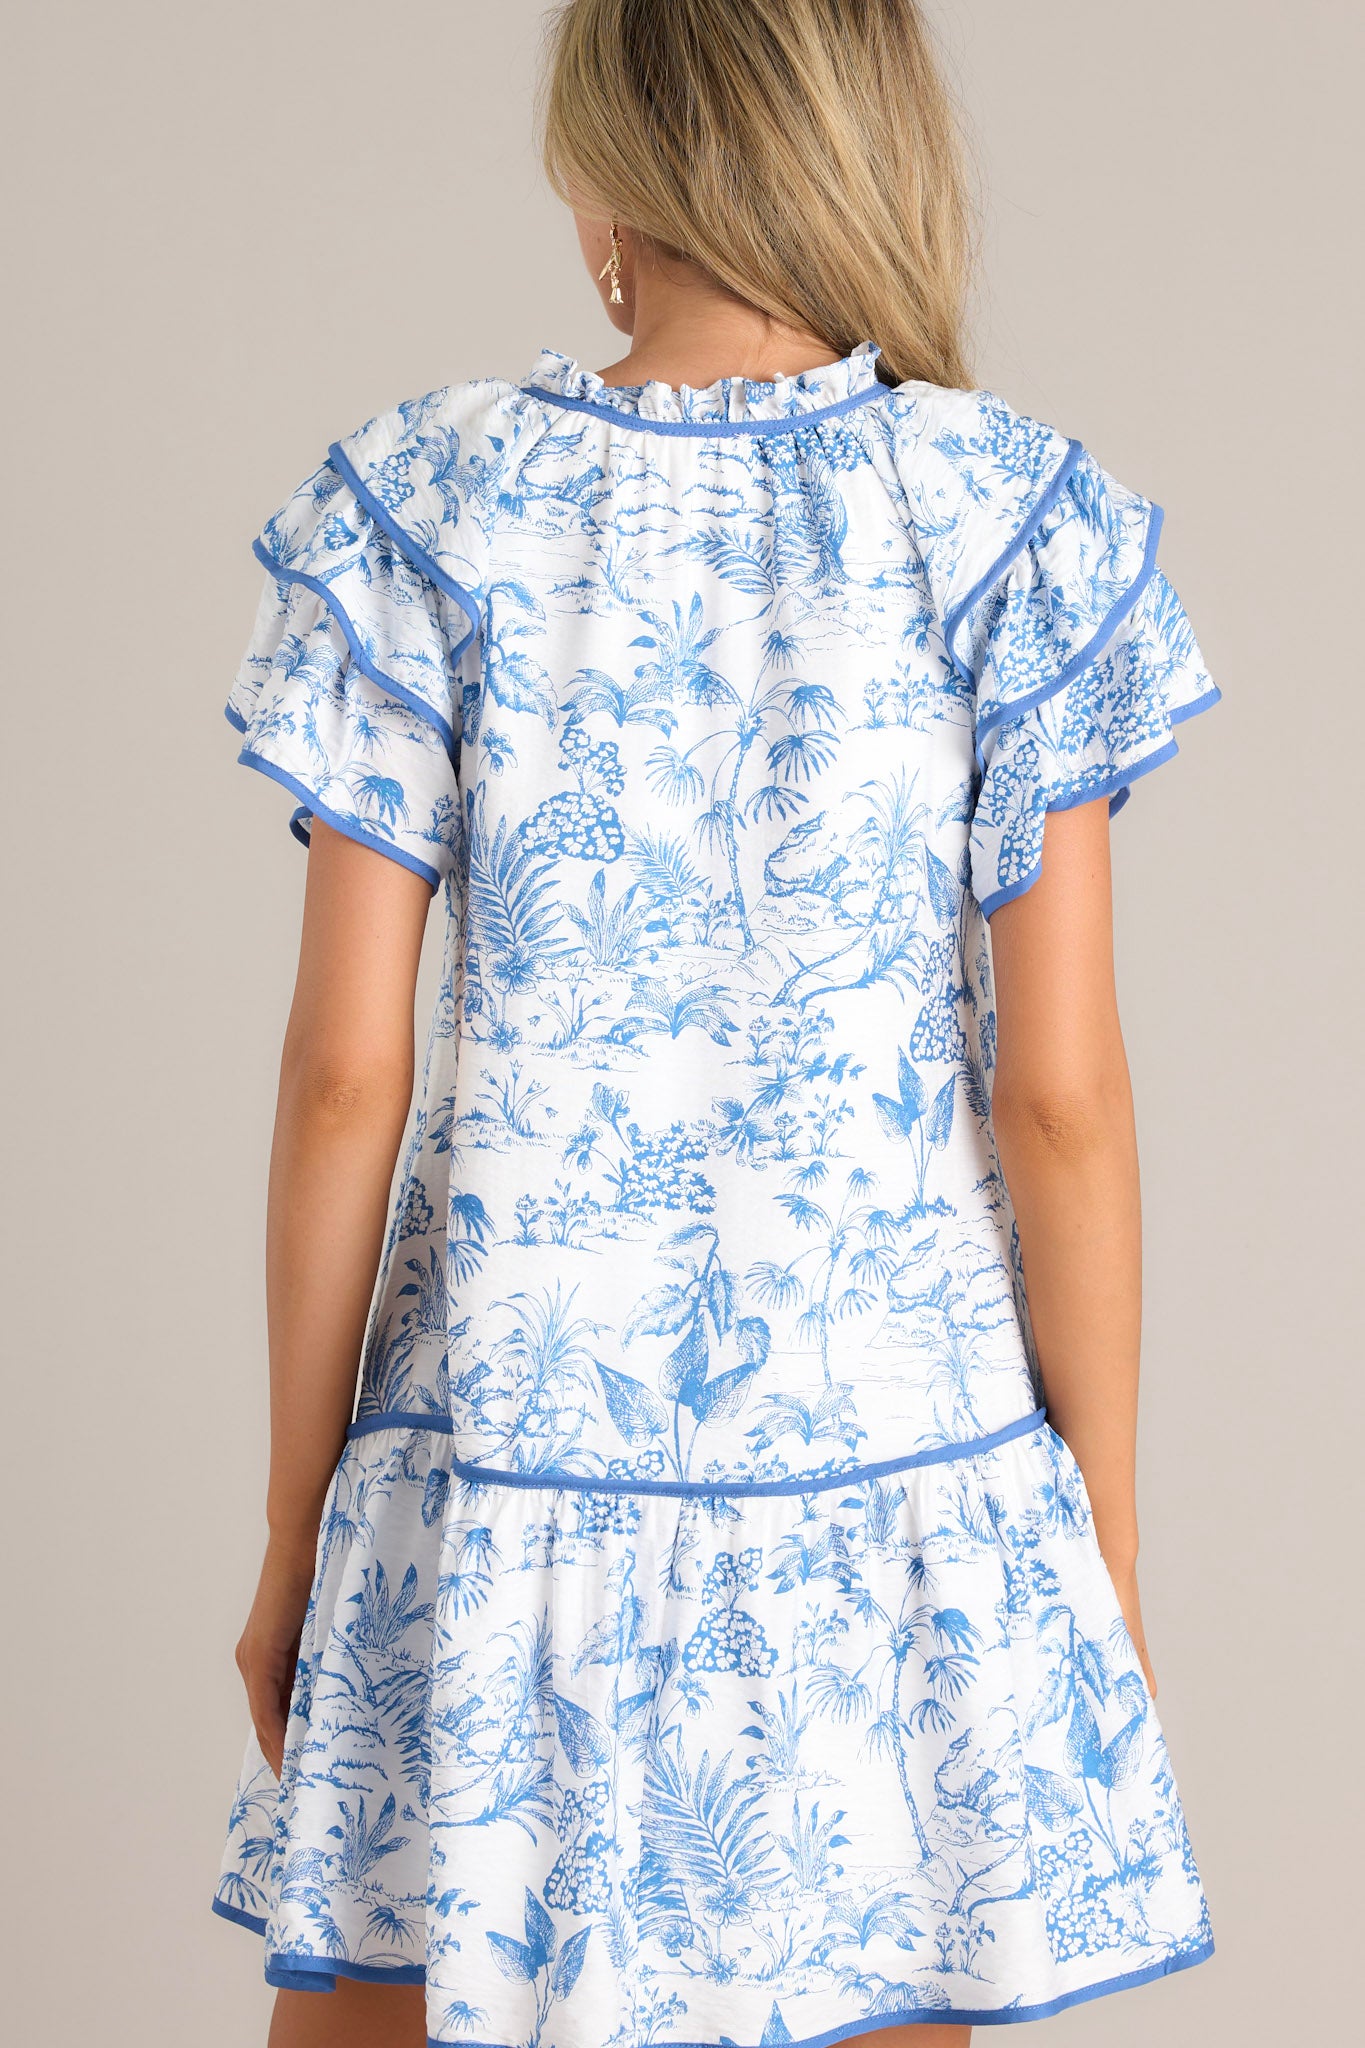 Back view of a blue and white floral print dress with ruffled short sleeves and a tiered skirt.